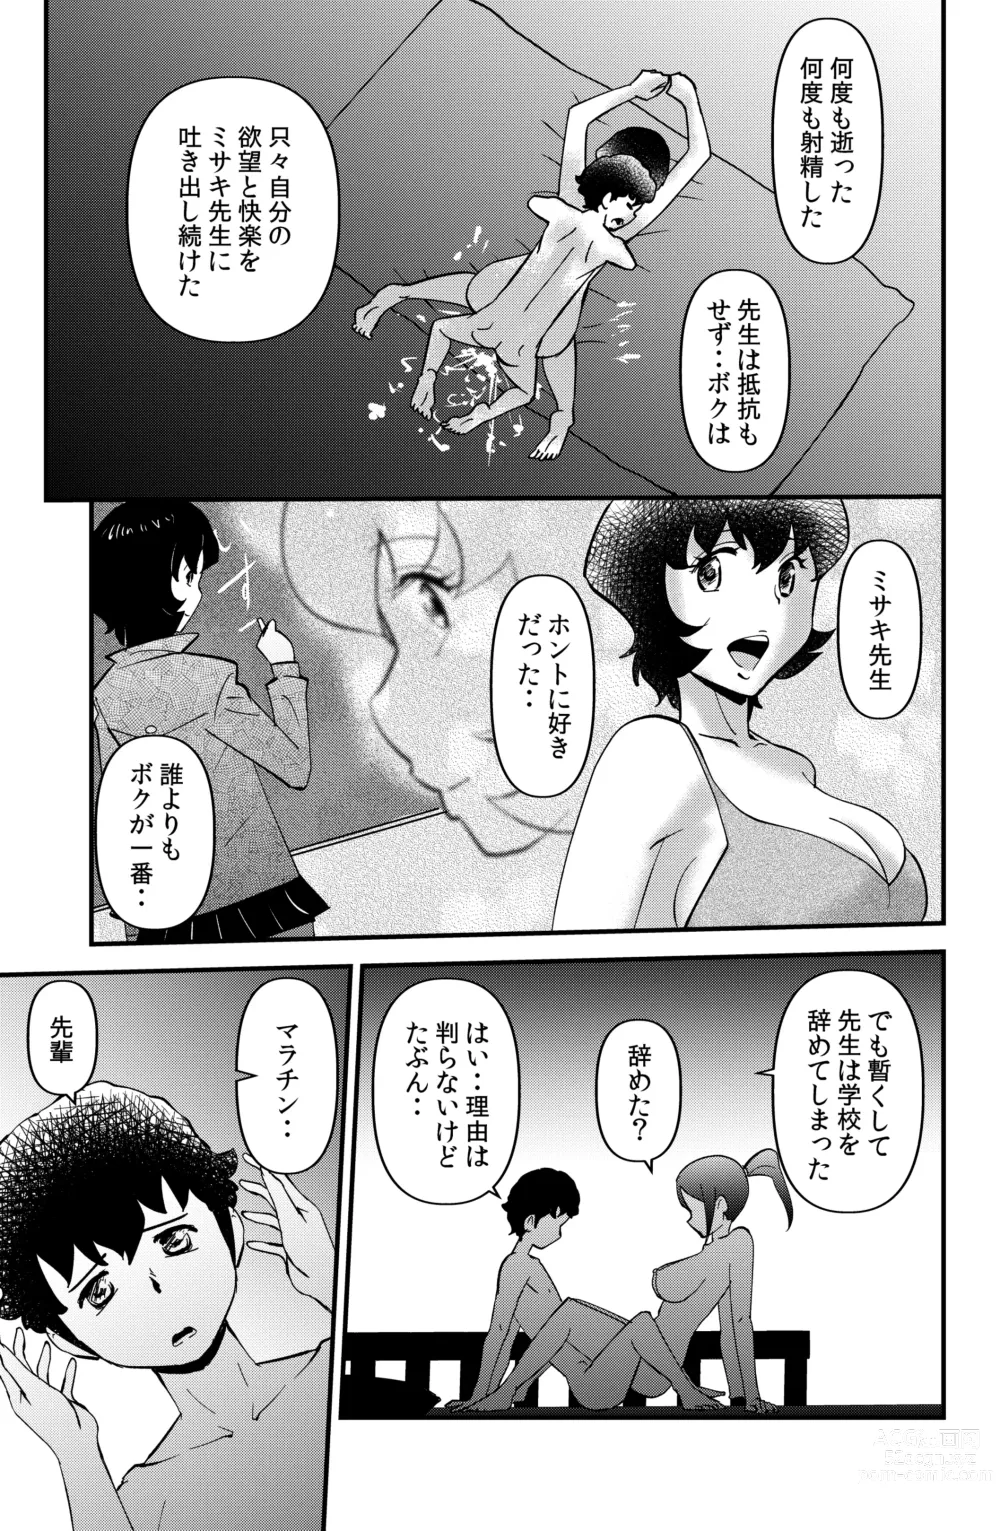 Page 15 of doujinshi Roommate